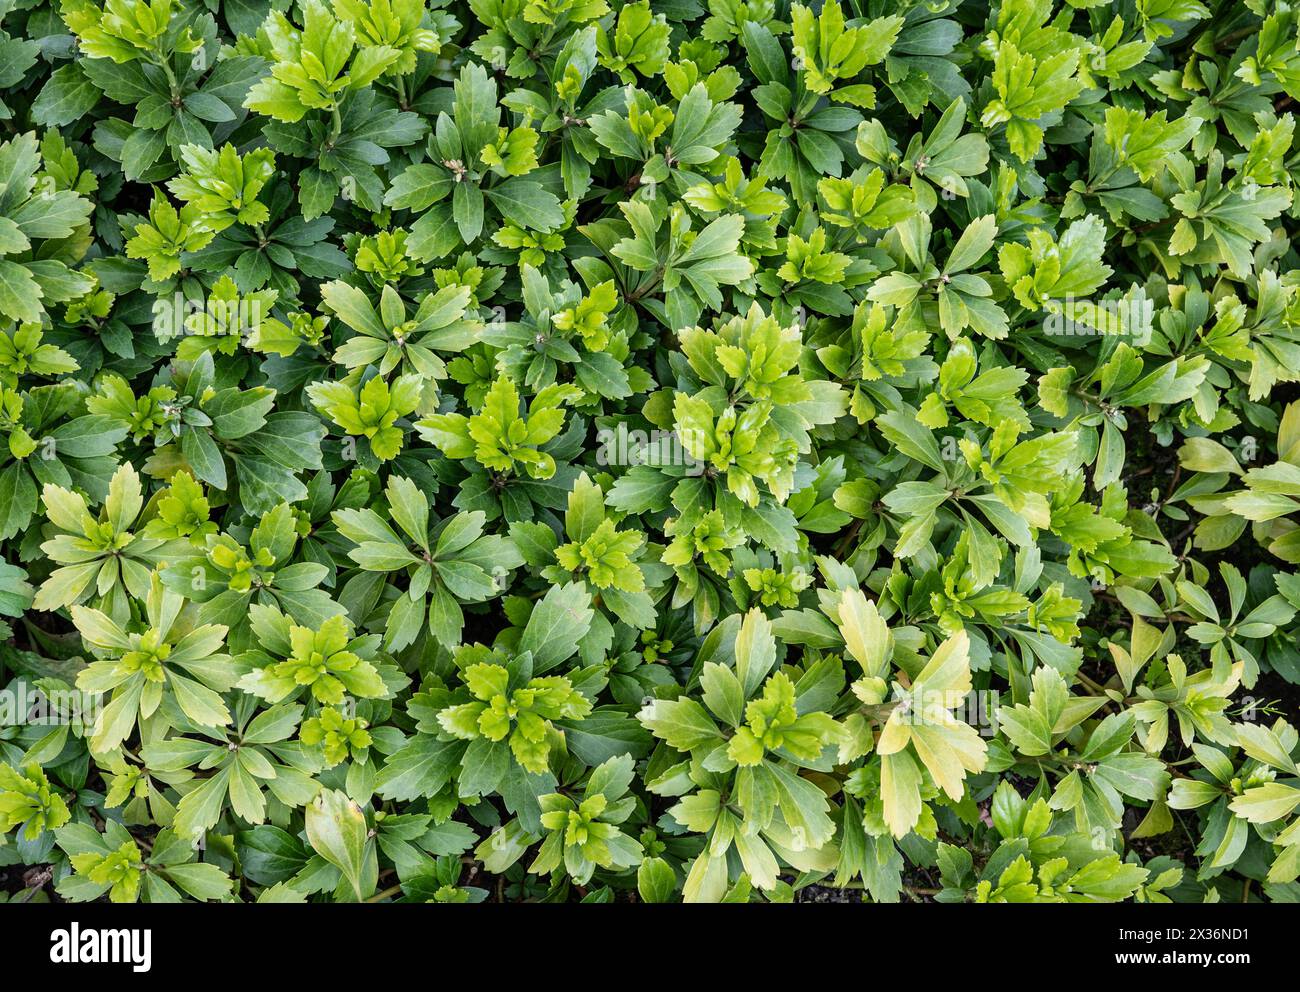 Green ground cover with leaves of Pachysandra plant. Stock Photo